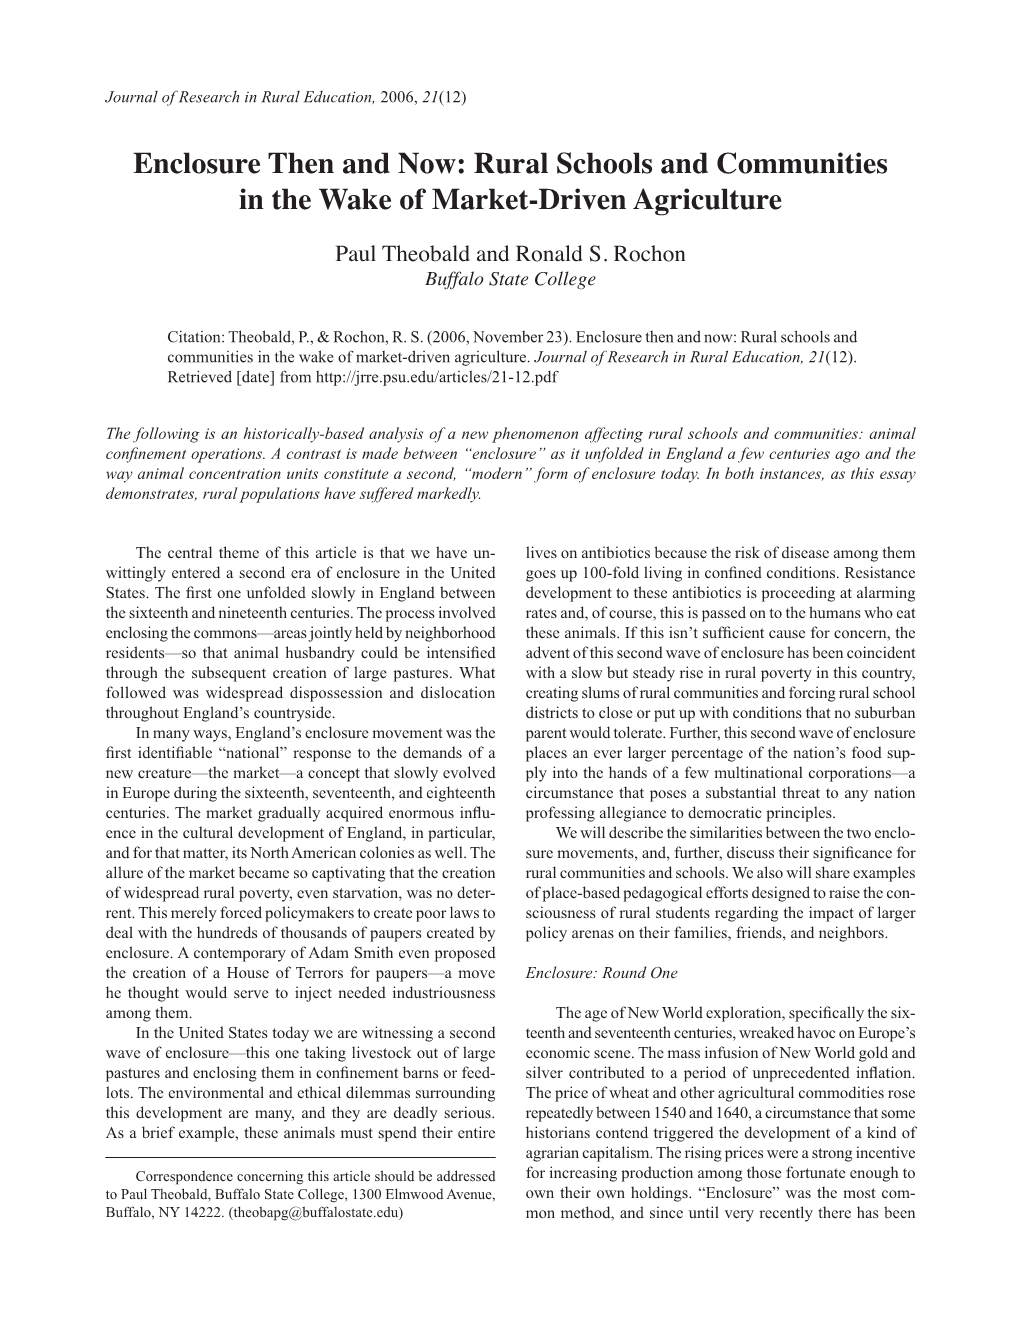 Enclosure Then and Now: Rural Schools and Communities in the Wake of Market-Driven Agriculture